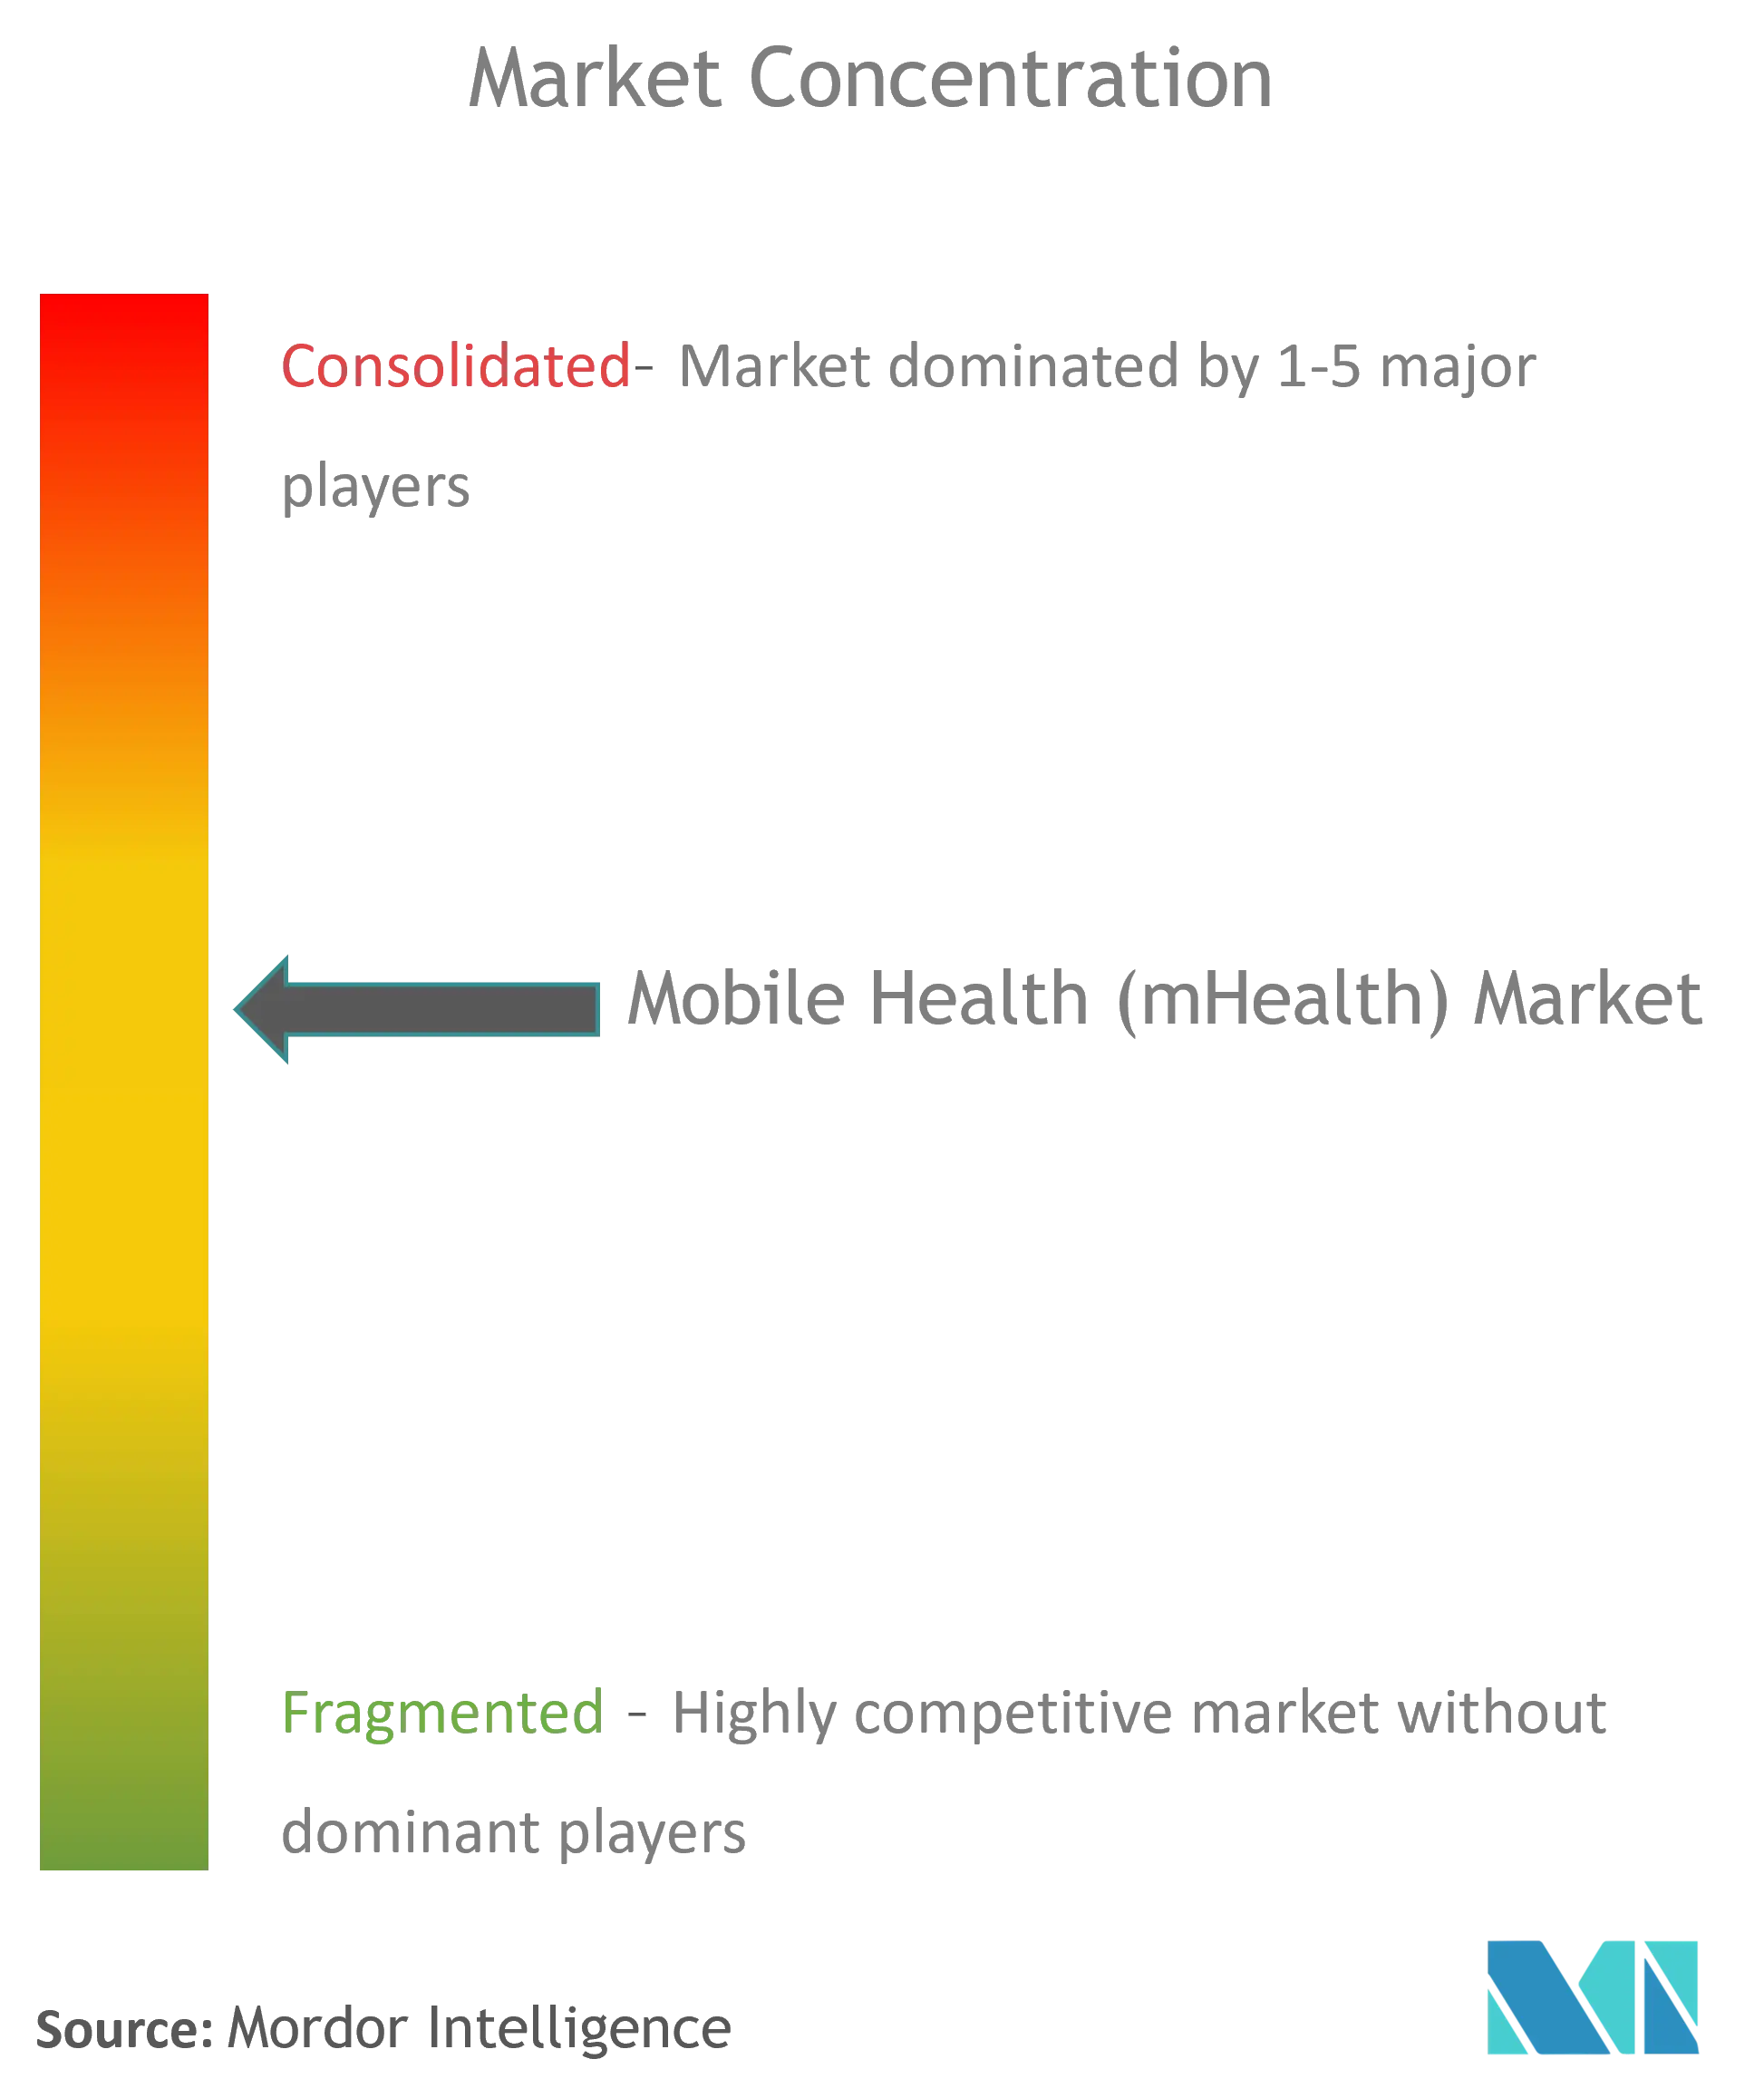 Mobile Health (mHealth) Market Concentration